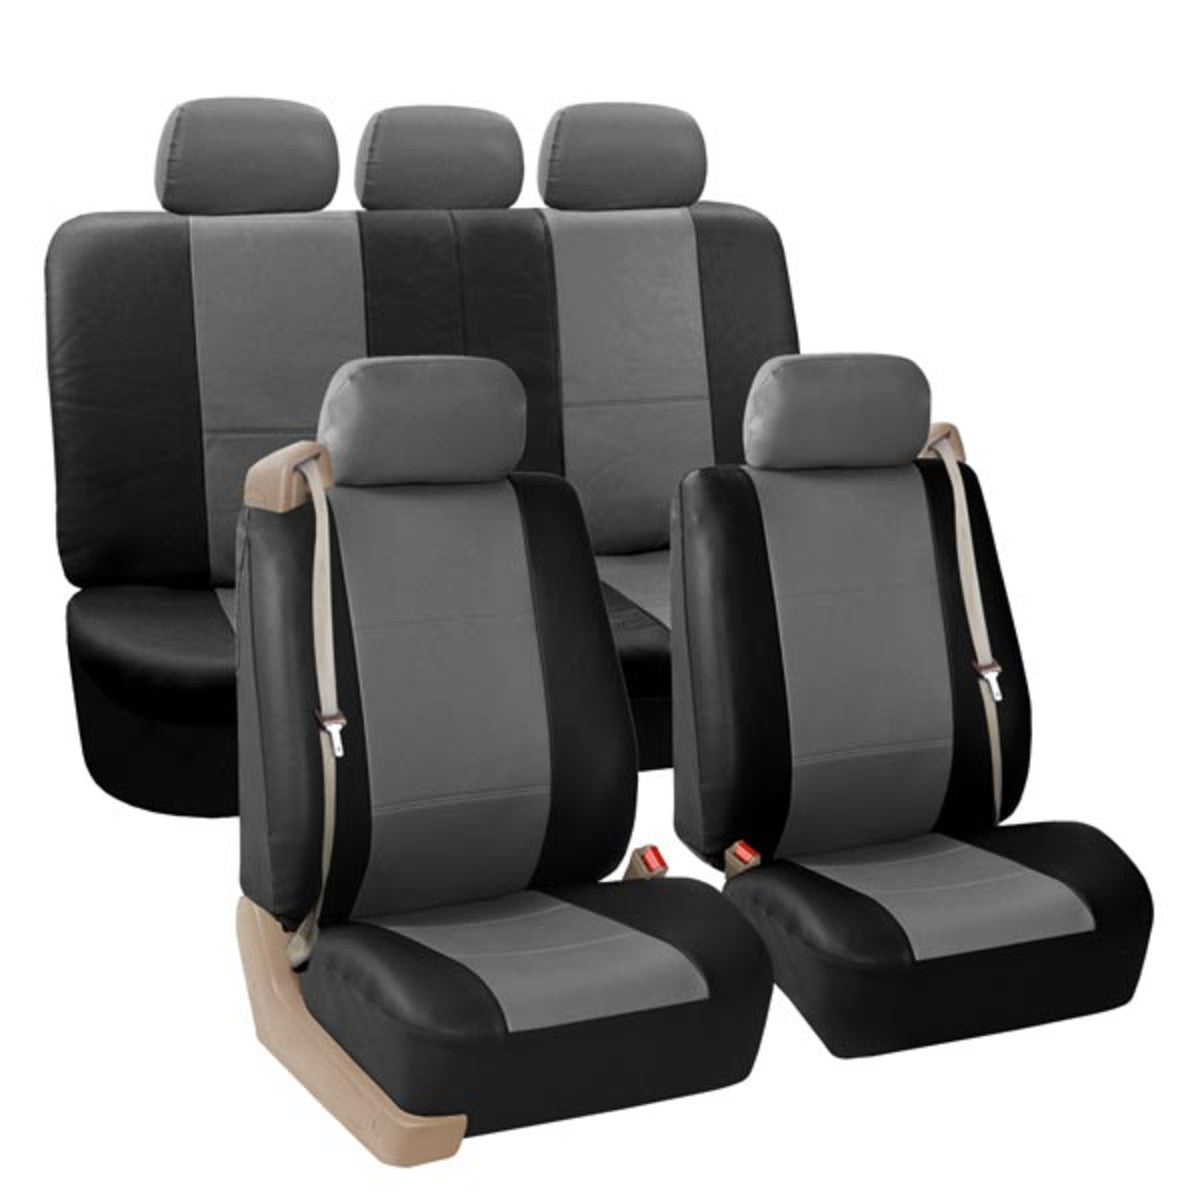 Built-in Seat Belt Compatible PU Leather Seat Covers Gray / Black